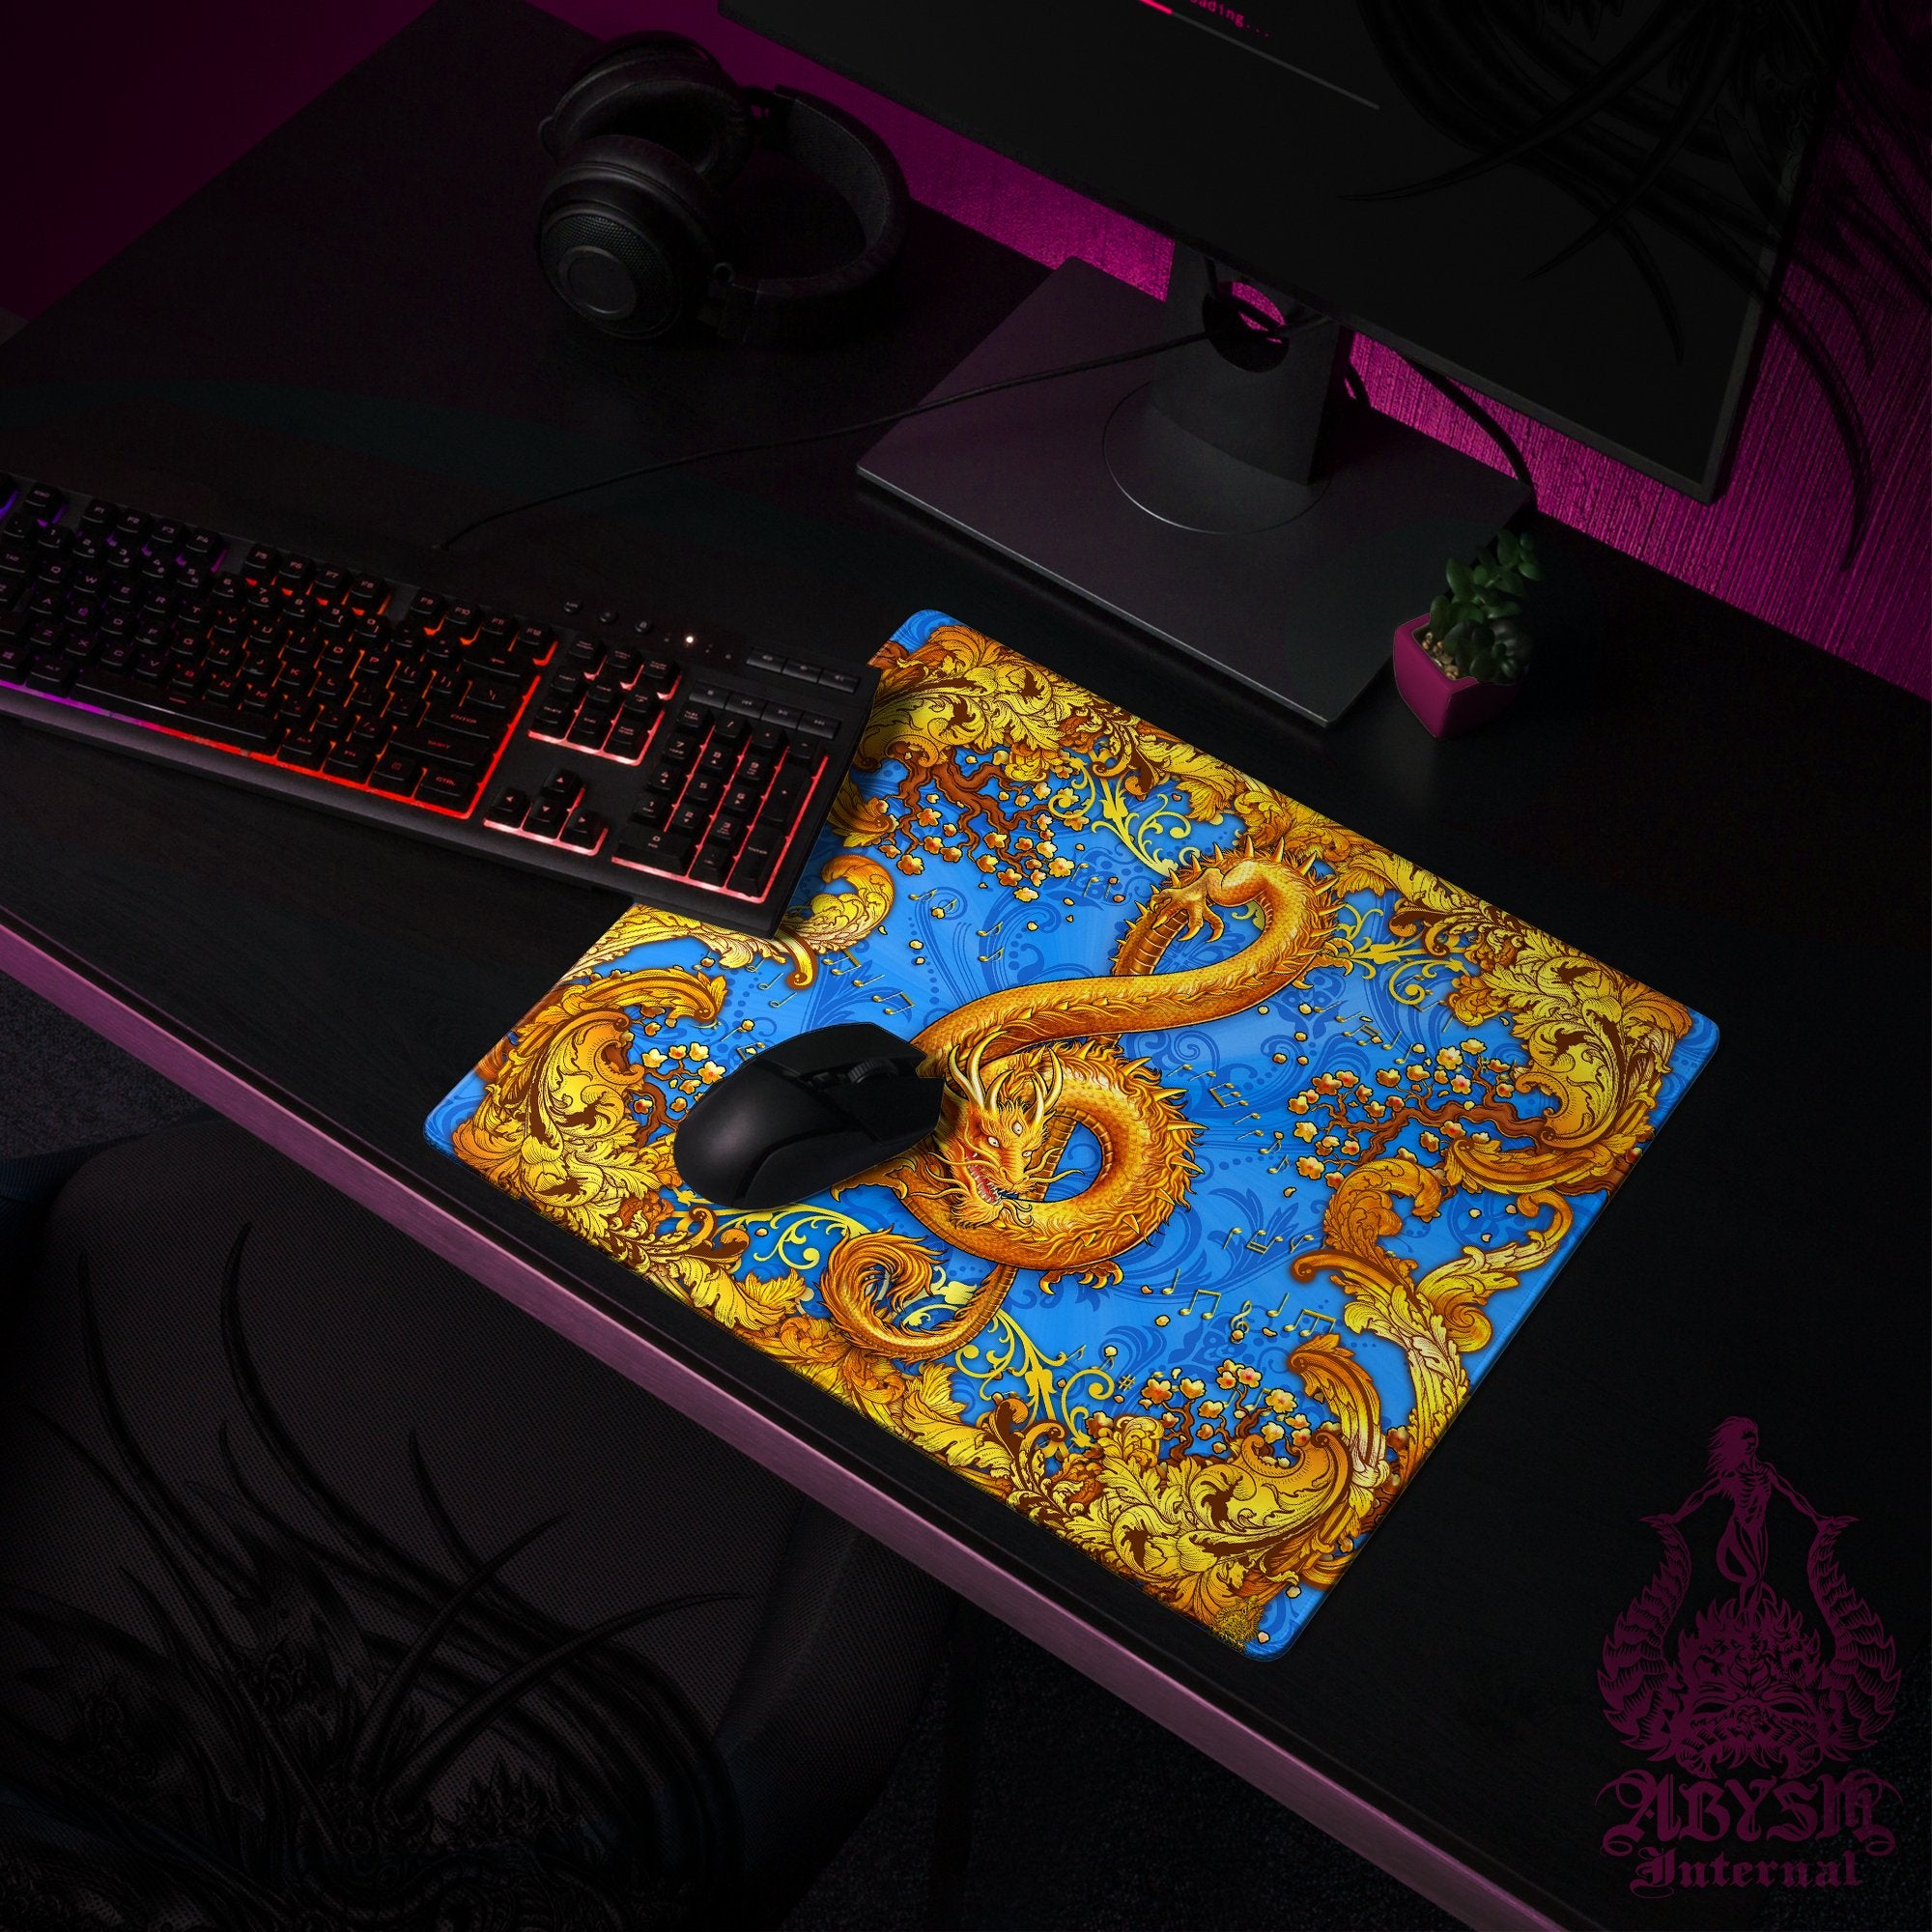 Dragon Gaming Mouse Pad, Music Desk Mat, Asian Table Protector Cover, Treble Clef Workpad, Chinese Fantasy Art Print - Cyan Gold - Abysm Internal